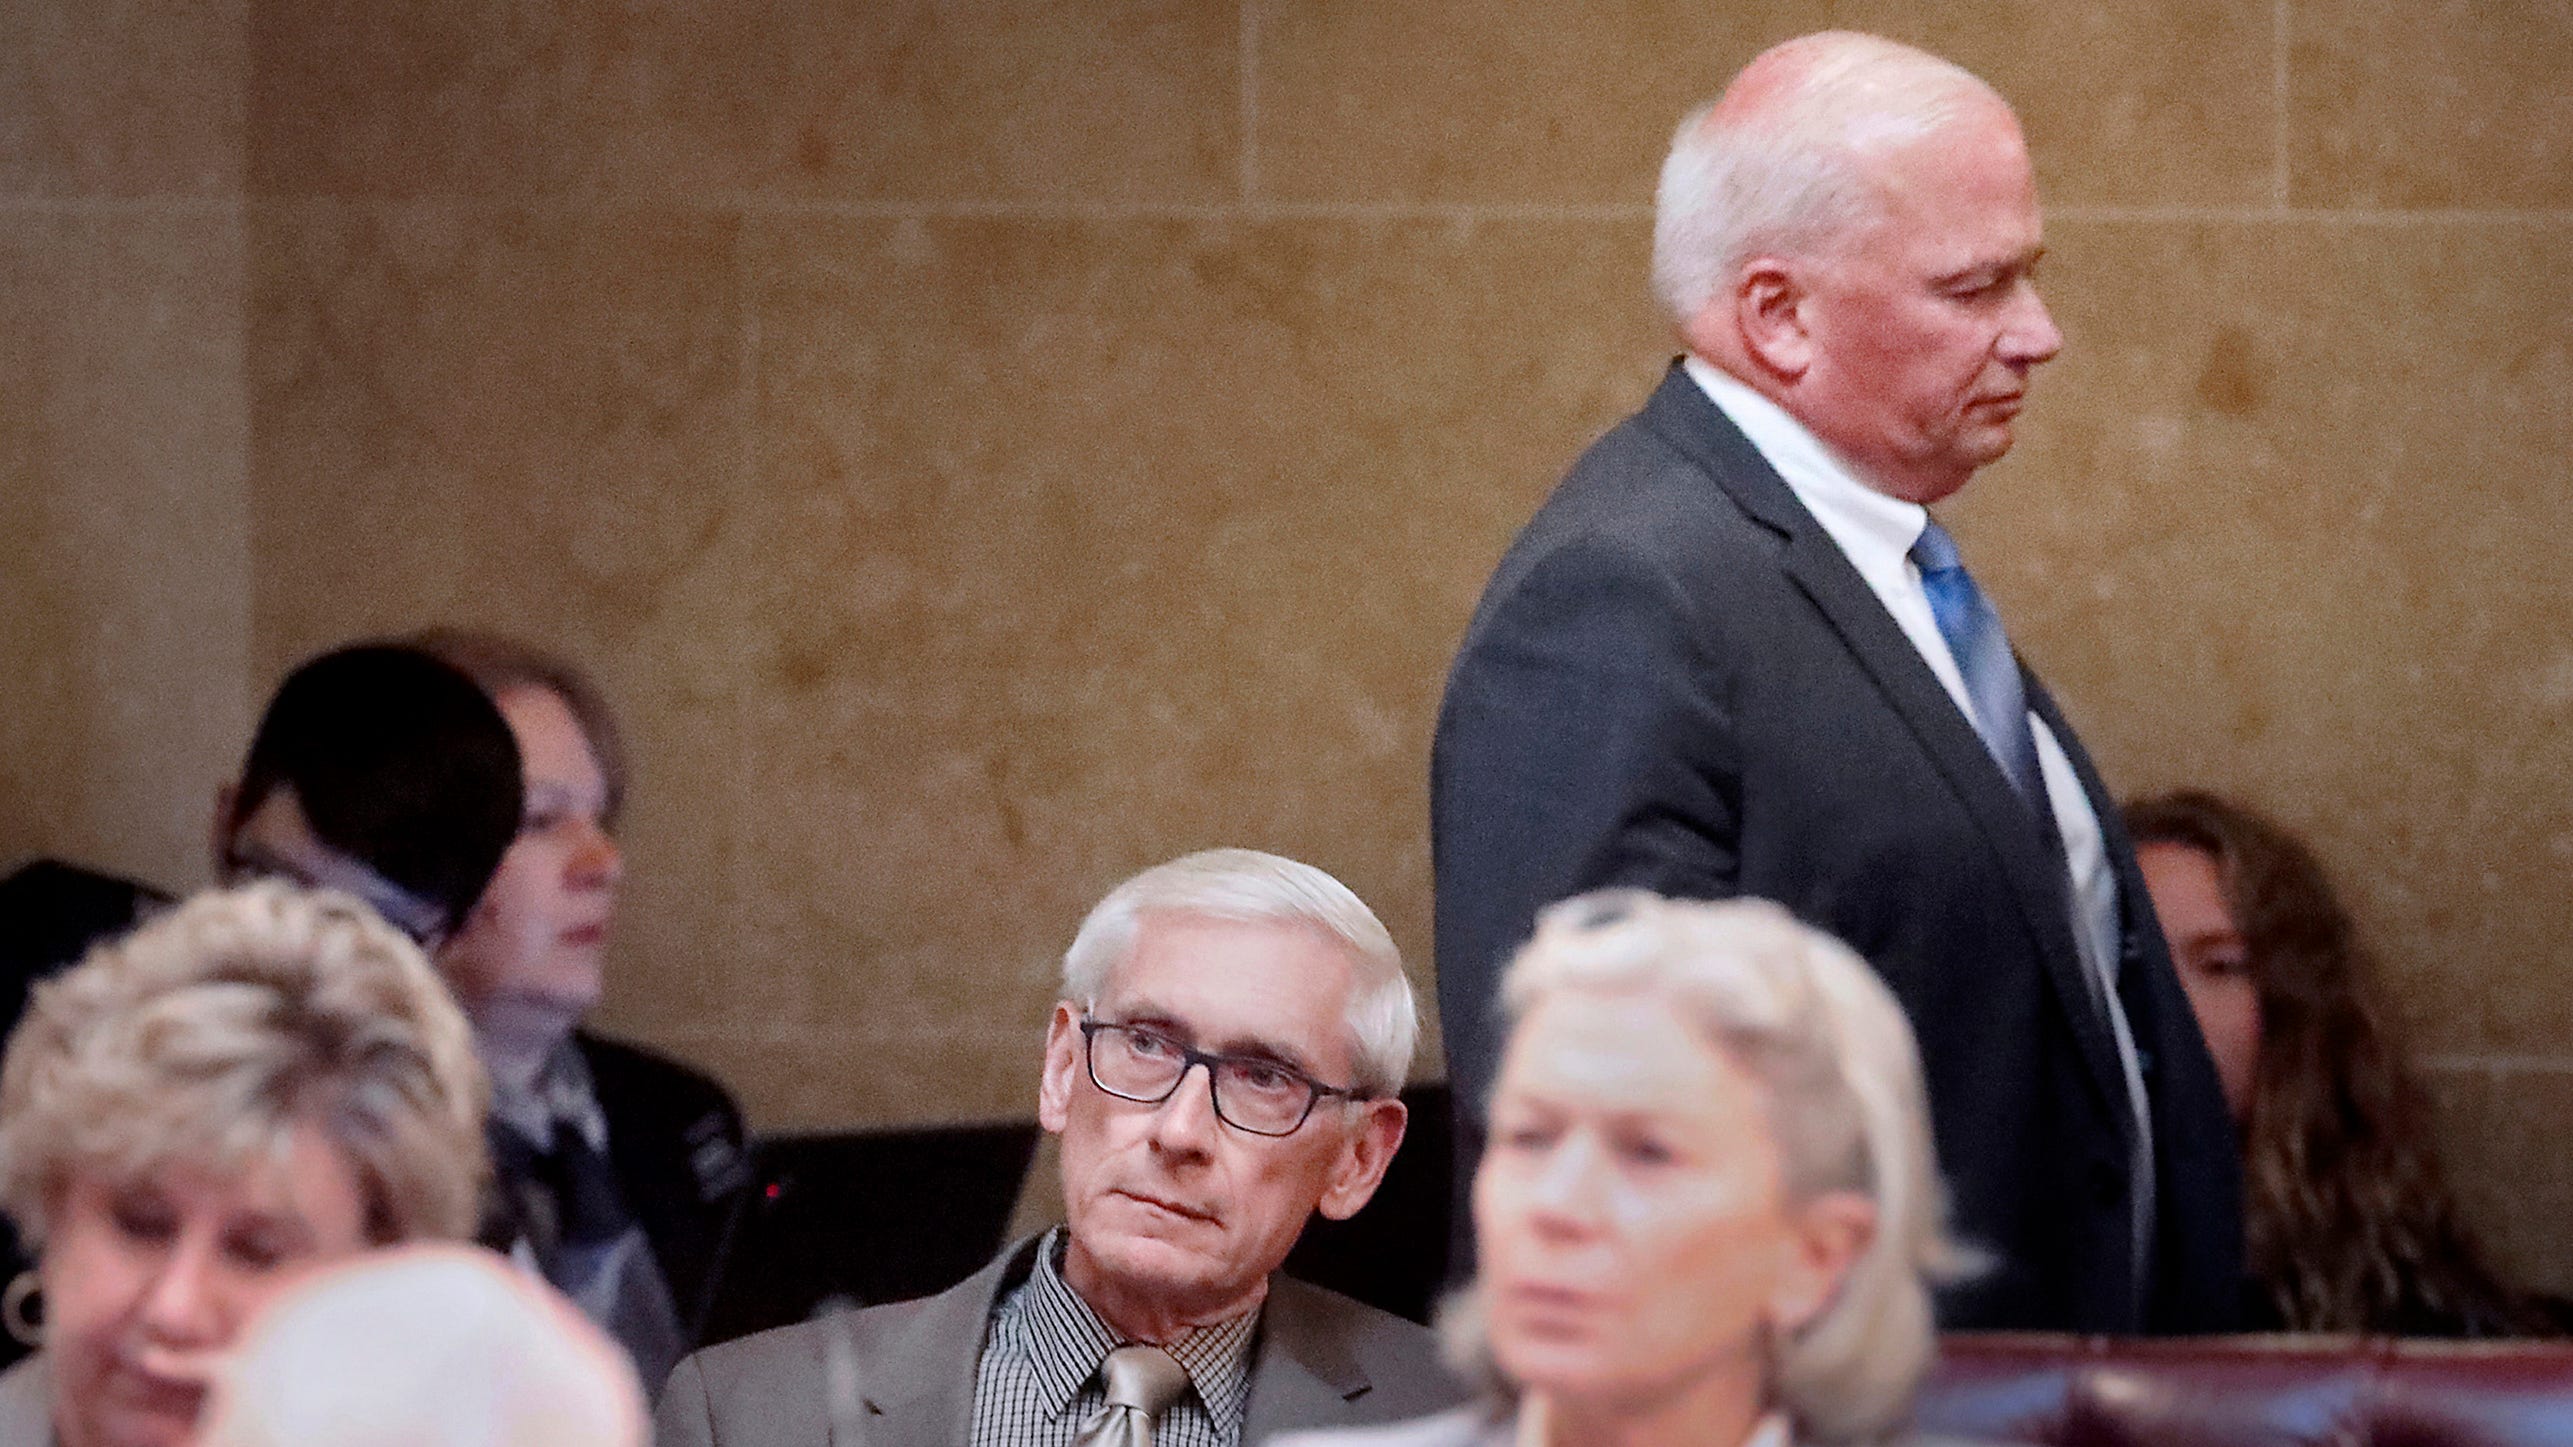 Wisconsin Gov. Tony Evers, seated at center, listens to a Senate debate regarding his pick to head the Department of Agriculture, Trade and Consumer Protection during a session at the Capitol in MadisonTuesday. Walking behind during the proceedings is Senate Majority Leader Scott Fitzgerald, R-Juneau.